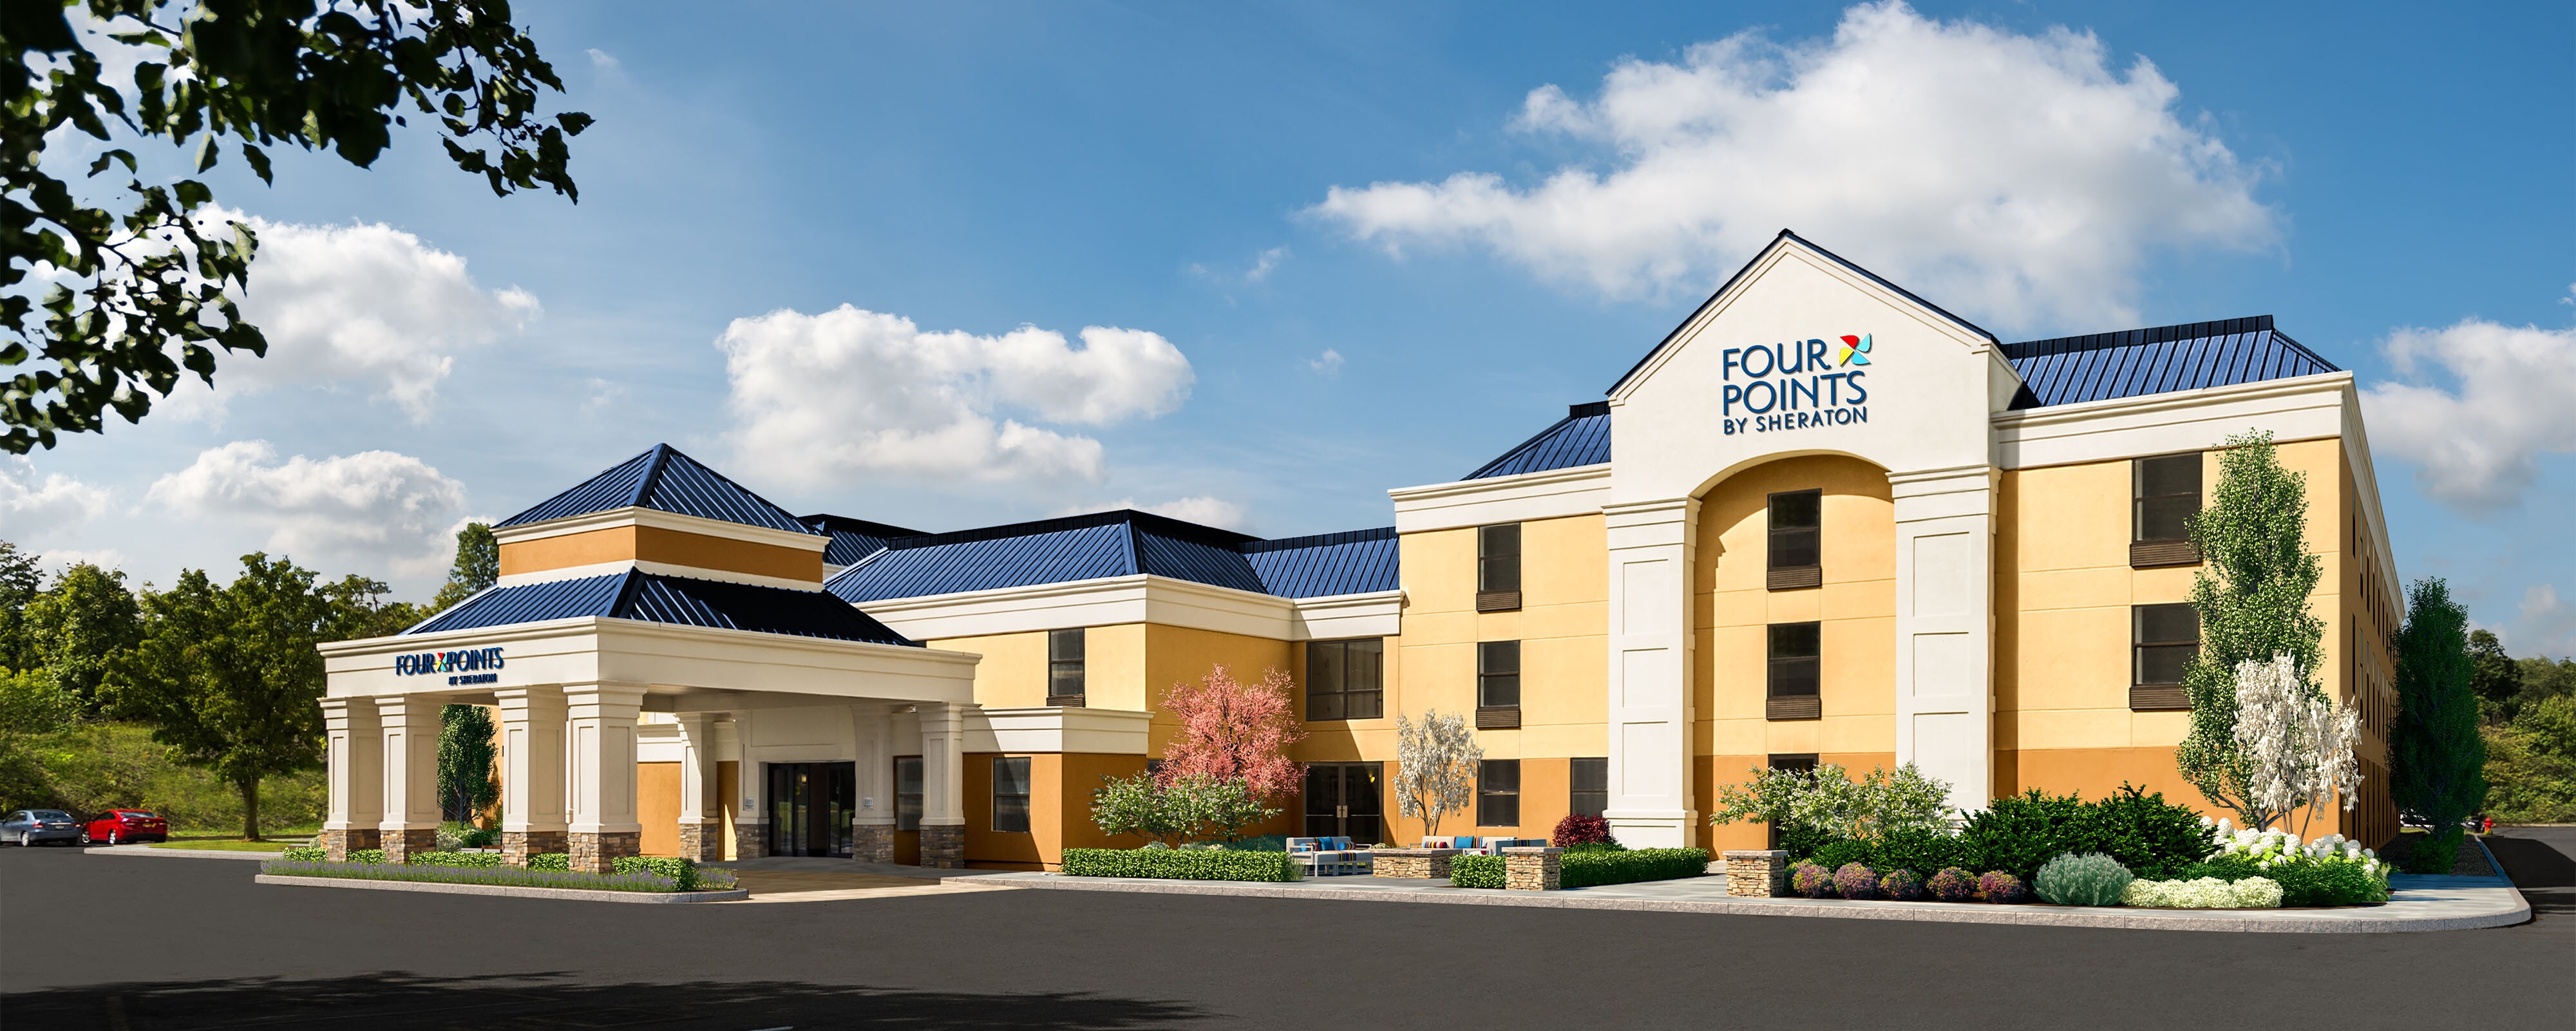 Hotels In Newburgh Ny Four Points By Sheraton Newburgh Stewart